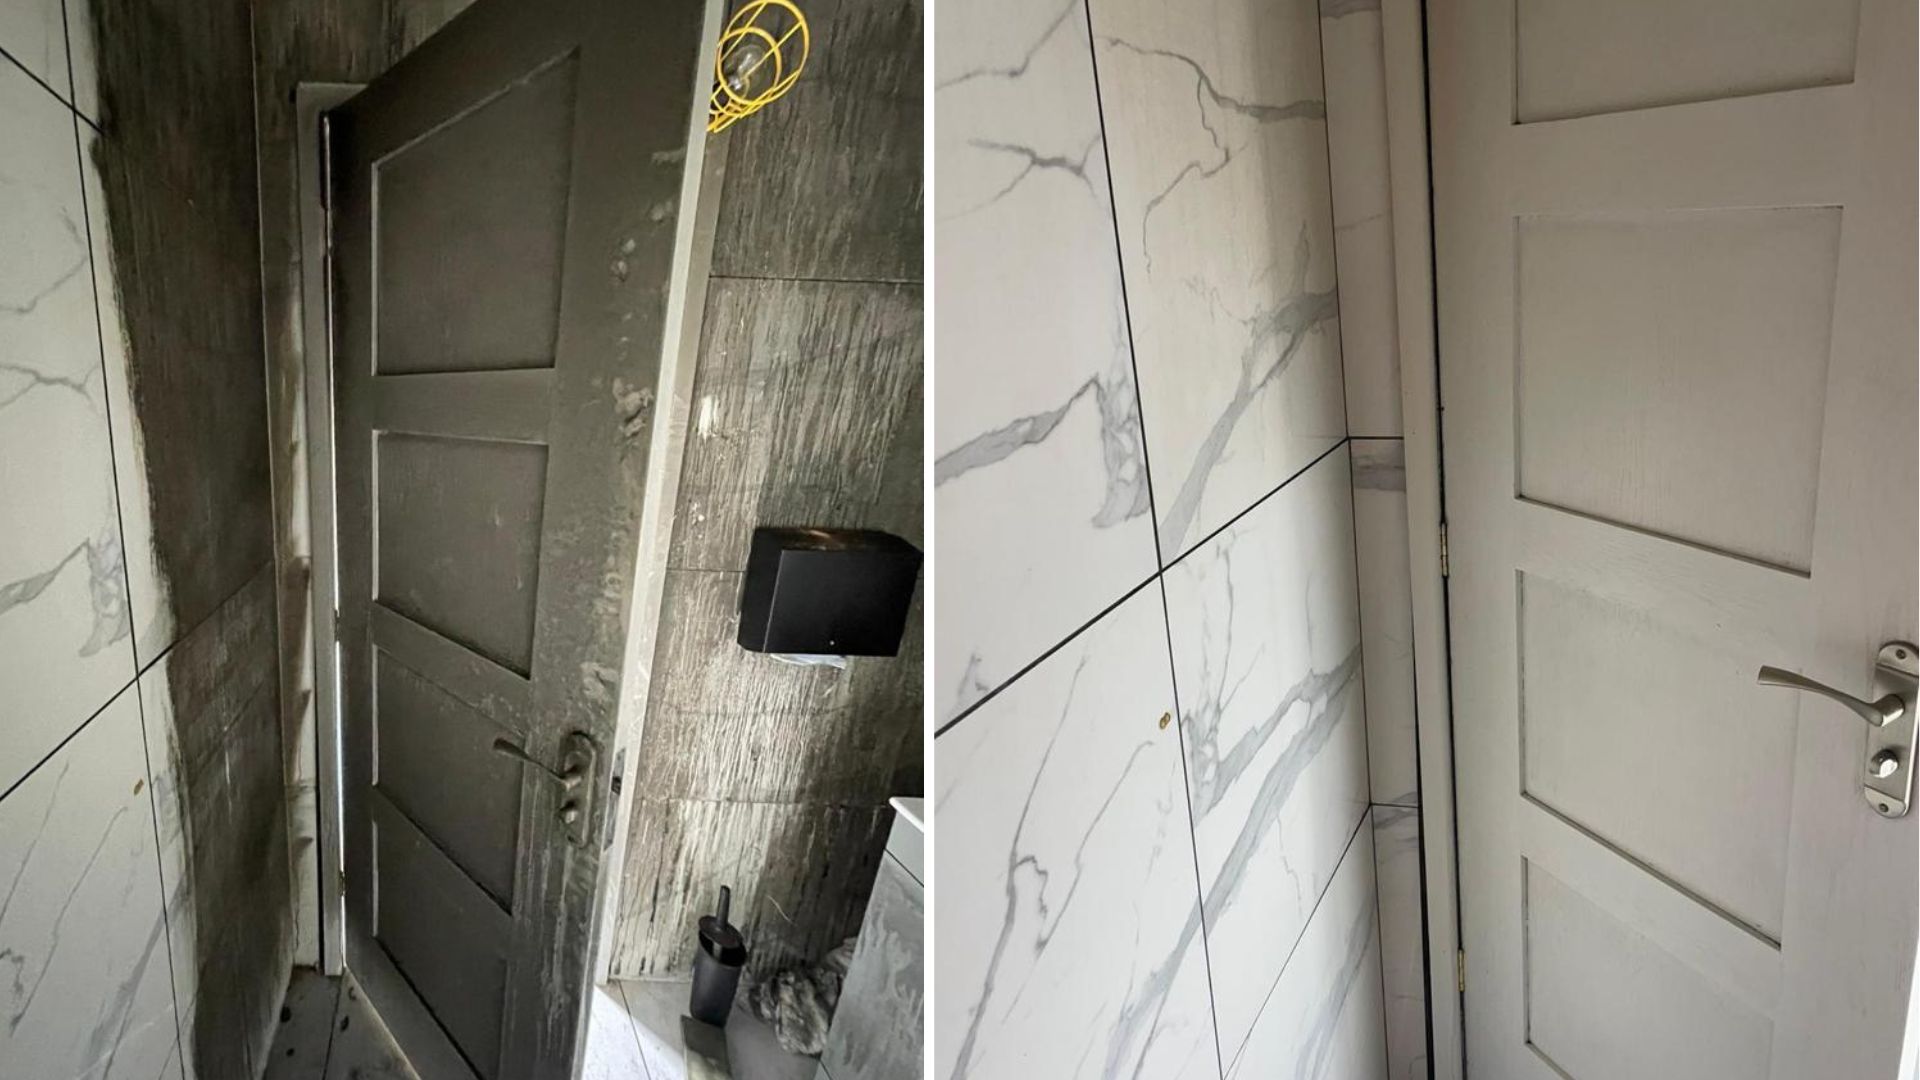 A before and after image of a fire damaged bathroom door and tiled wall.